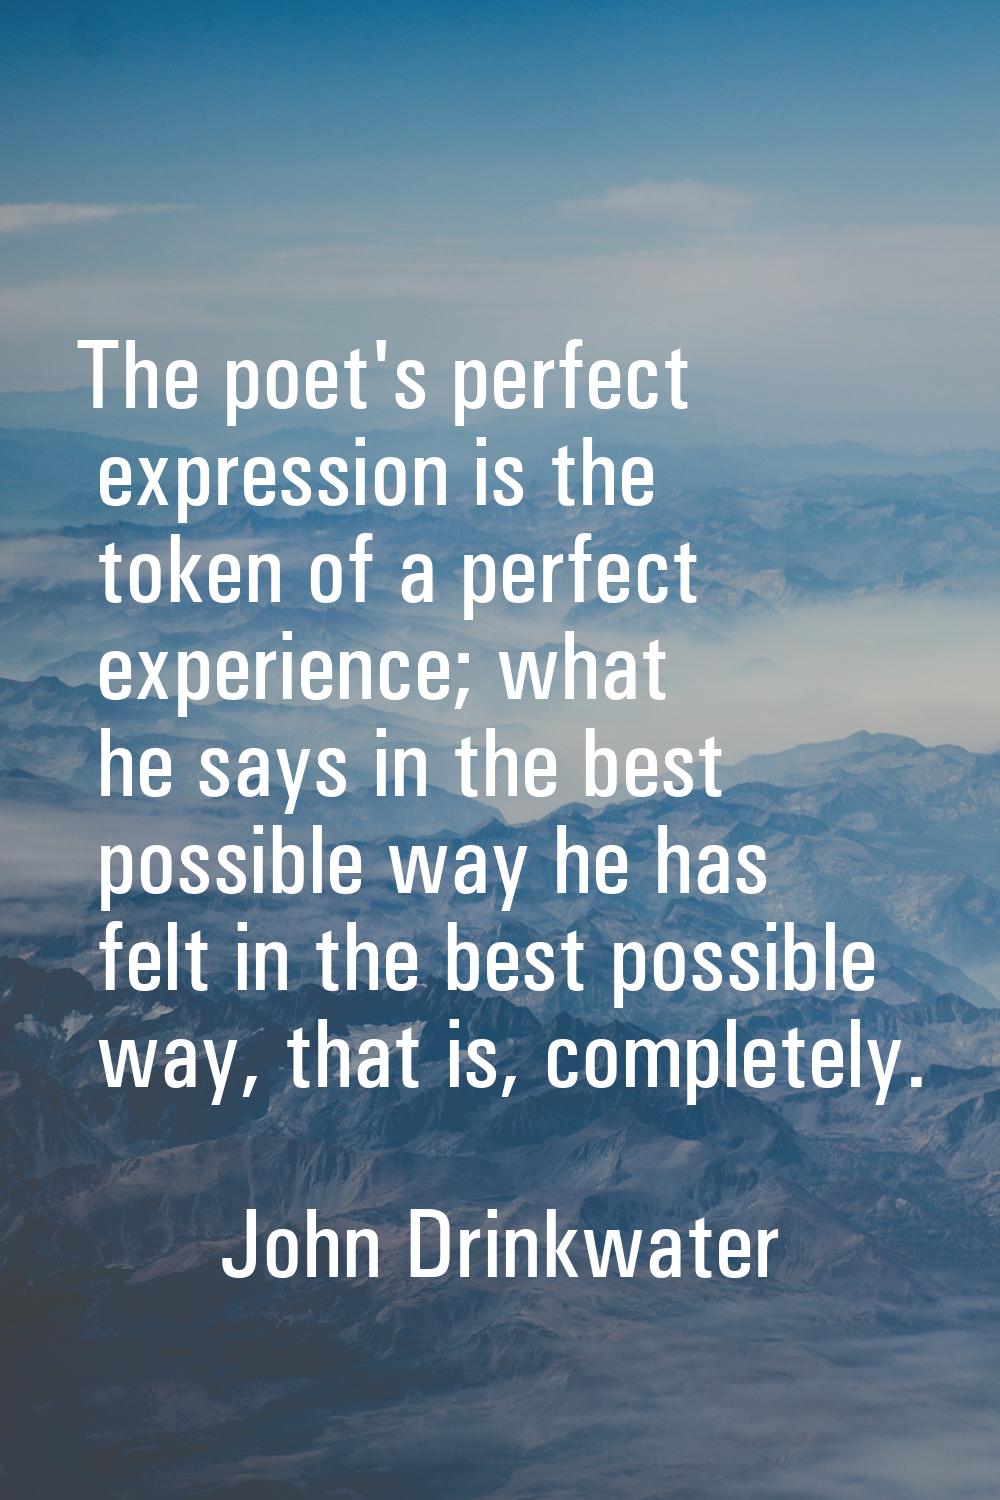 The poet's perfect expression is the token of a perfect experience; what he says in the best possib